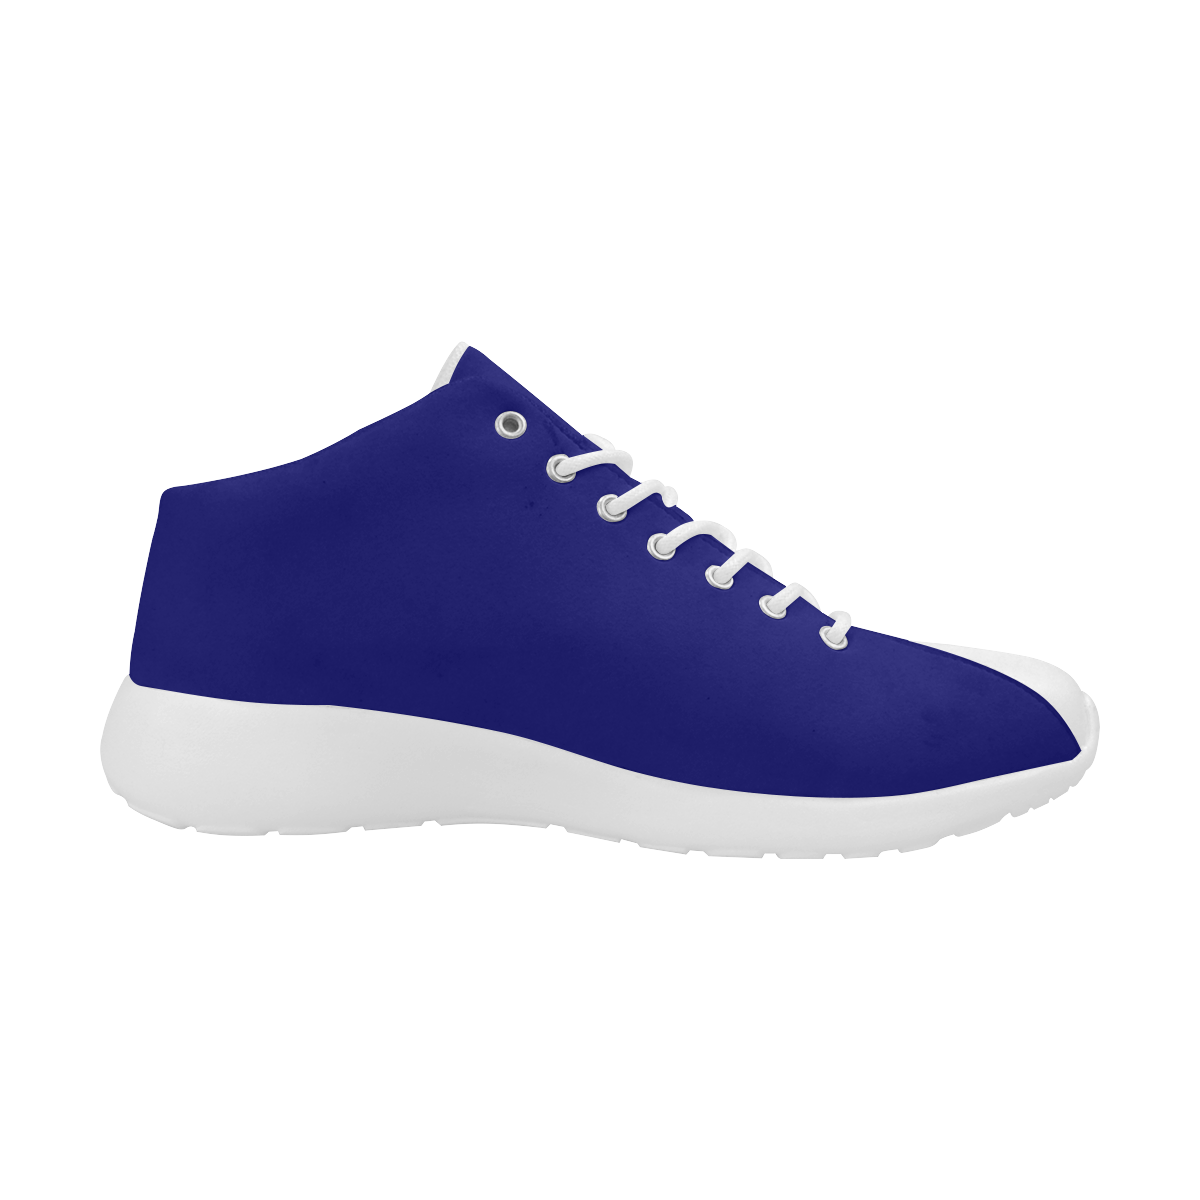 Royal Blue Regalness Solid Colored Men's Basketball Training Shoes (Model 47502)